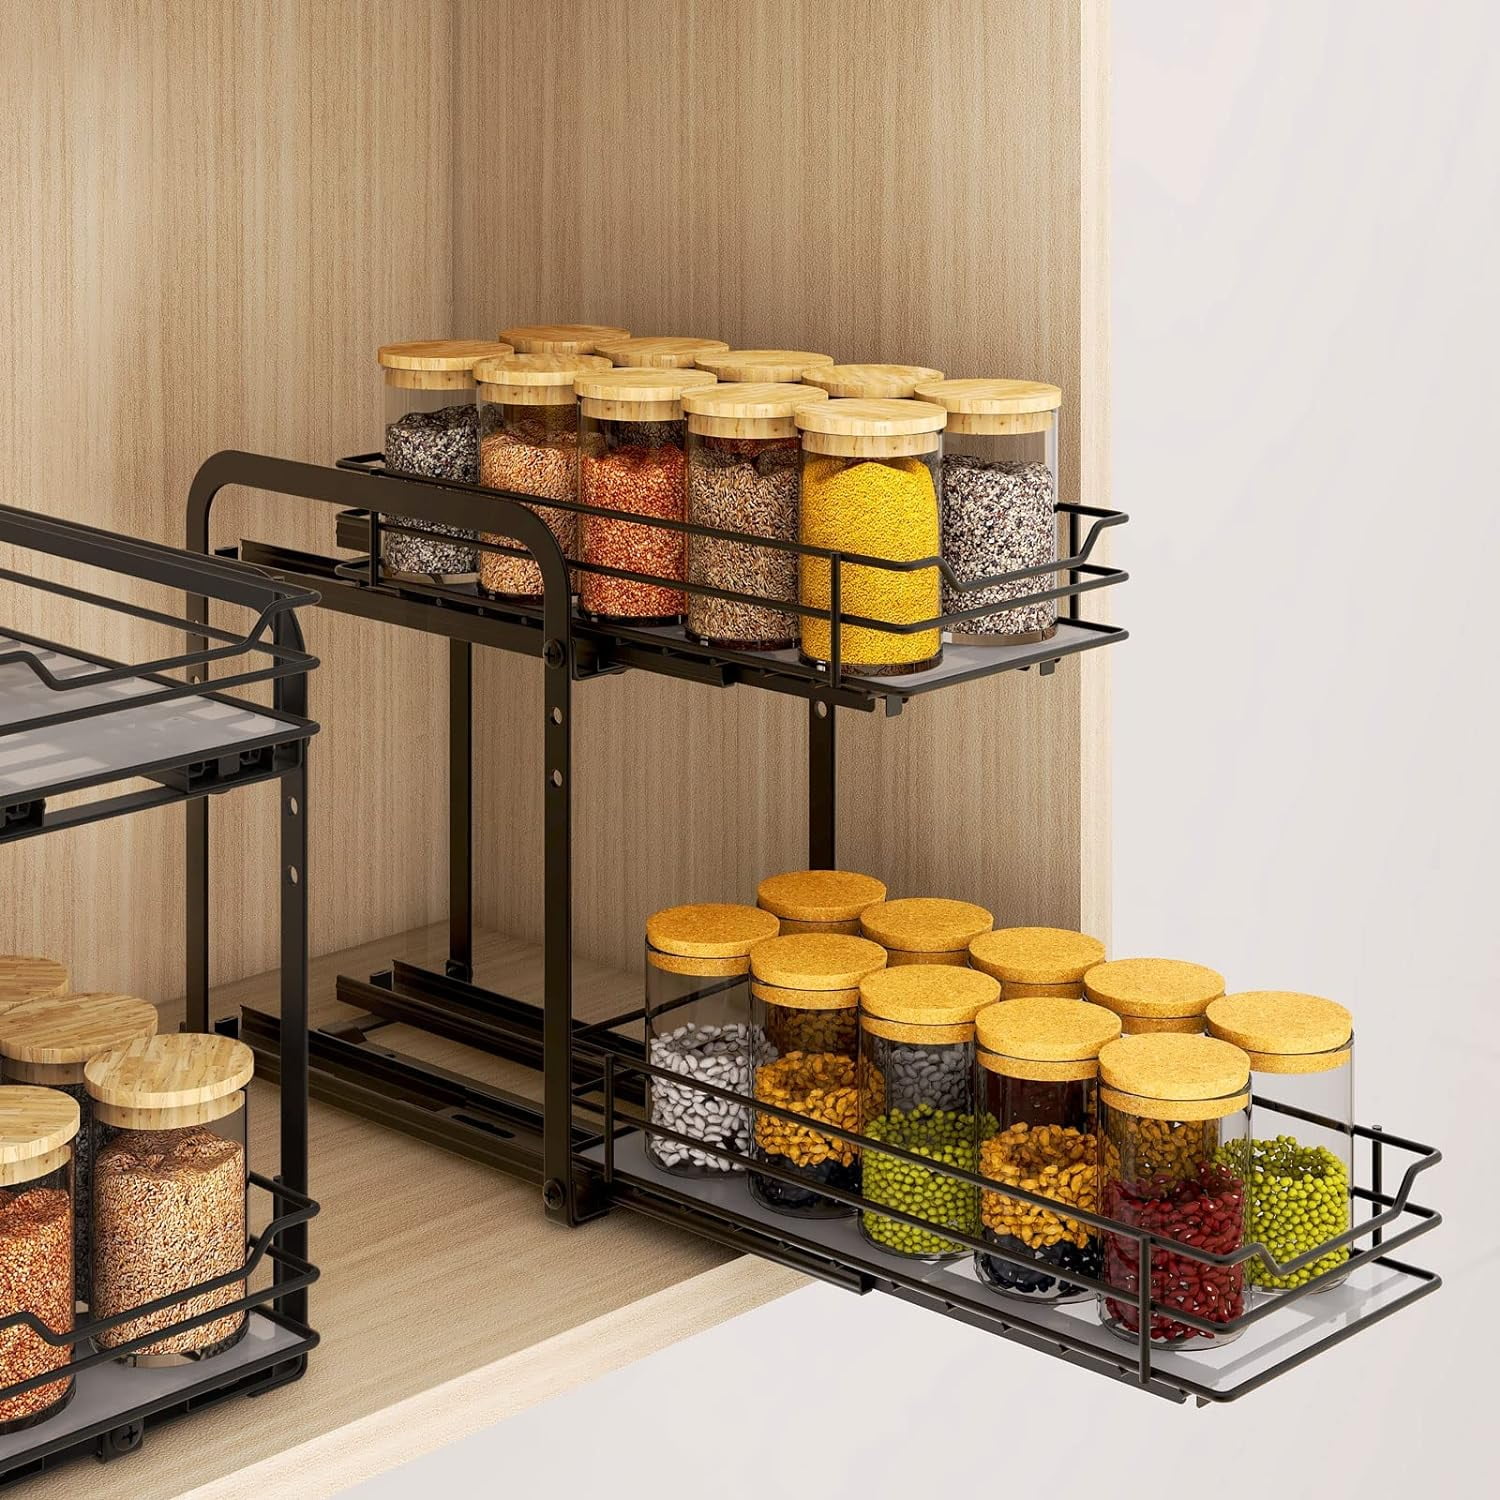 Wood 3-Tier Expandable Spice Rack - Threshold™